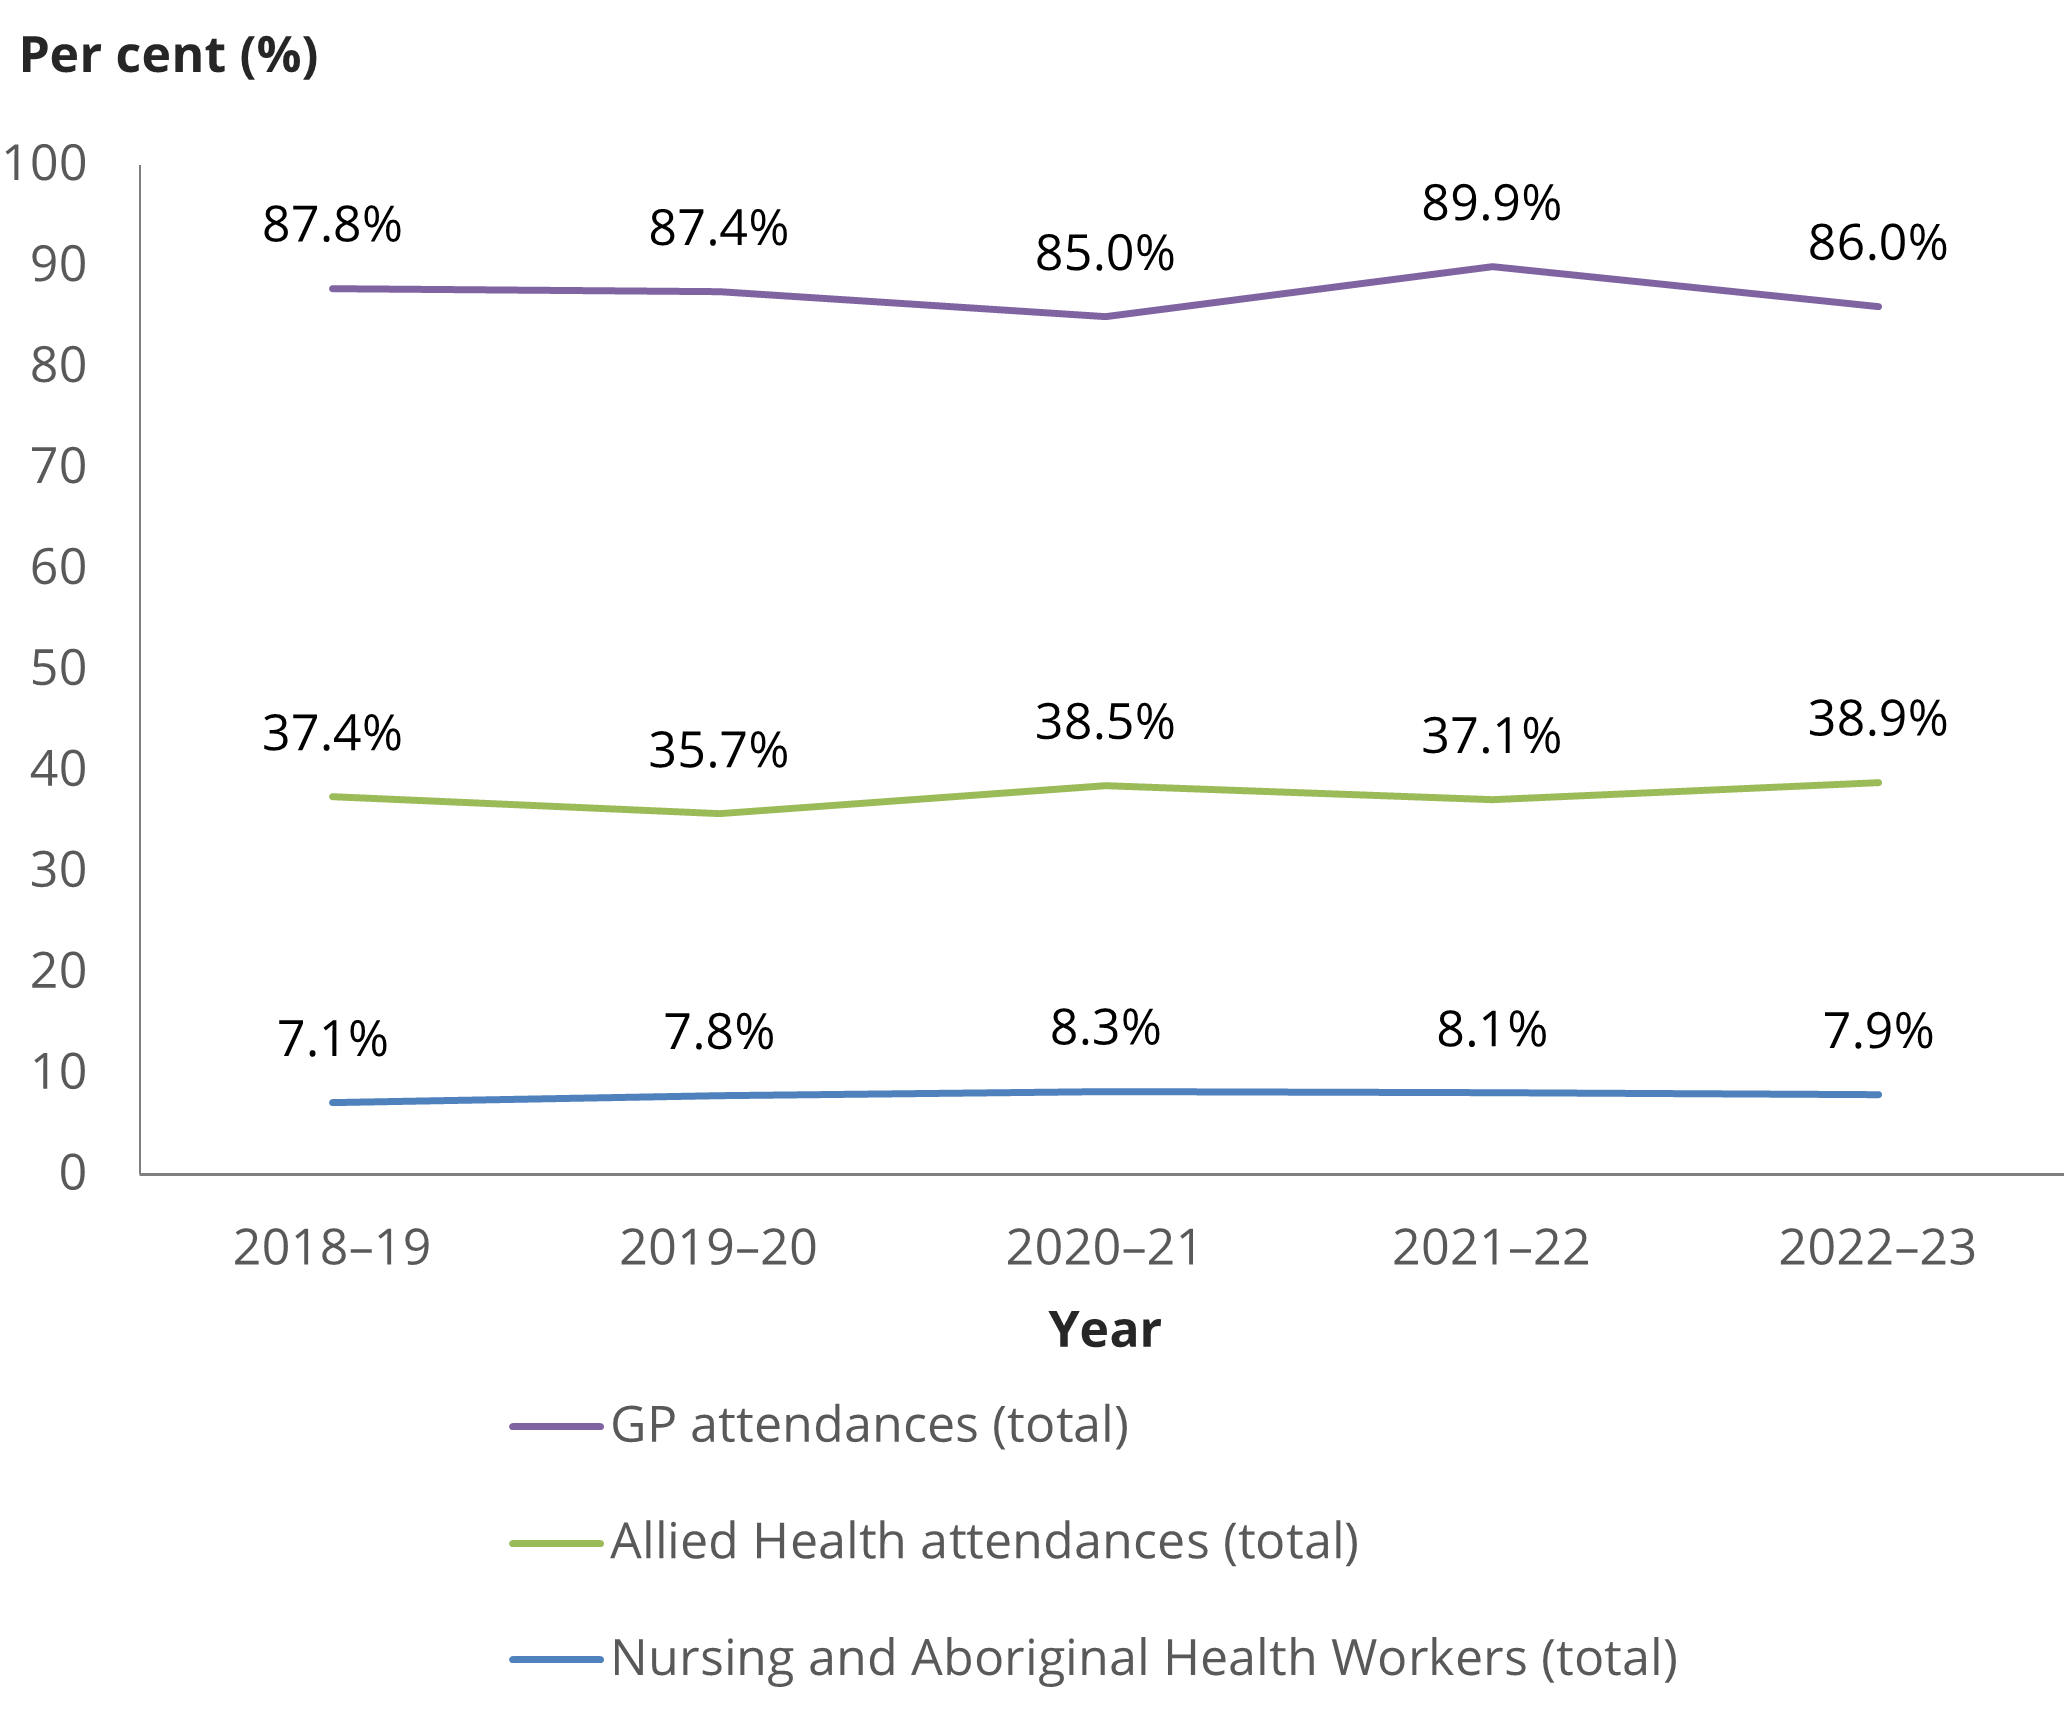 This chart shows that the proportion of people who received a primary care service varies over time, from 2018–19 to 2022–23.